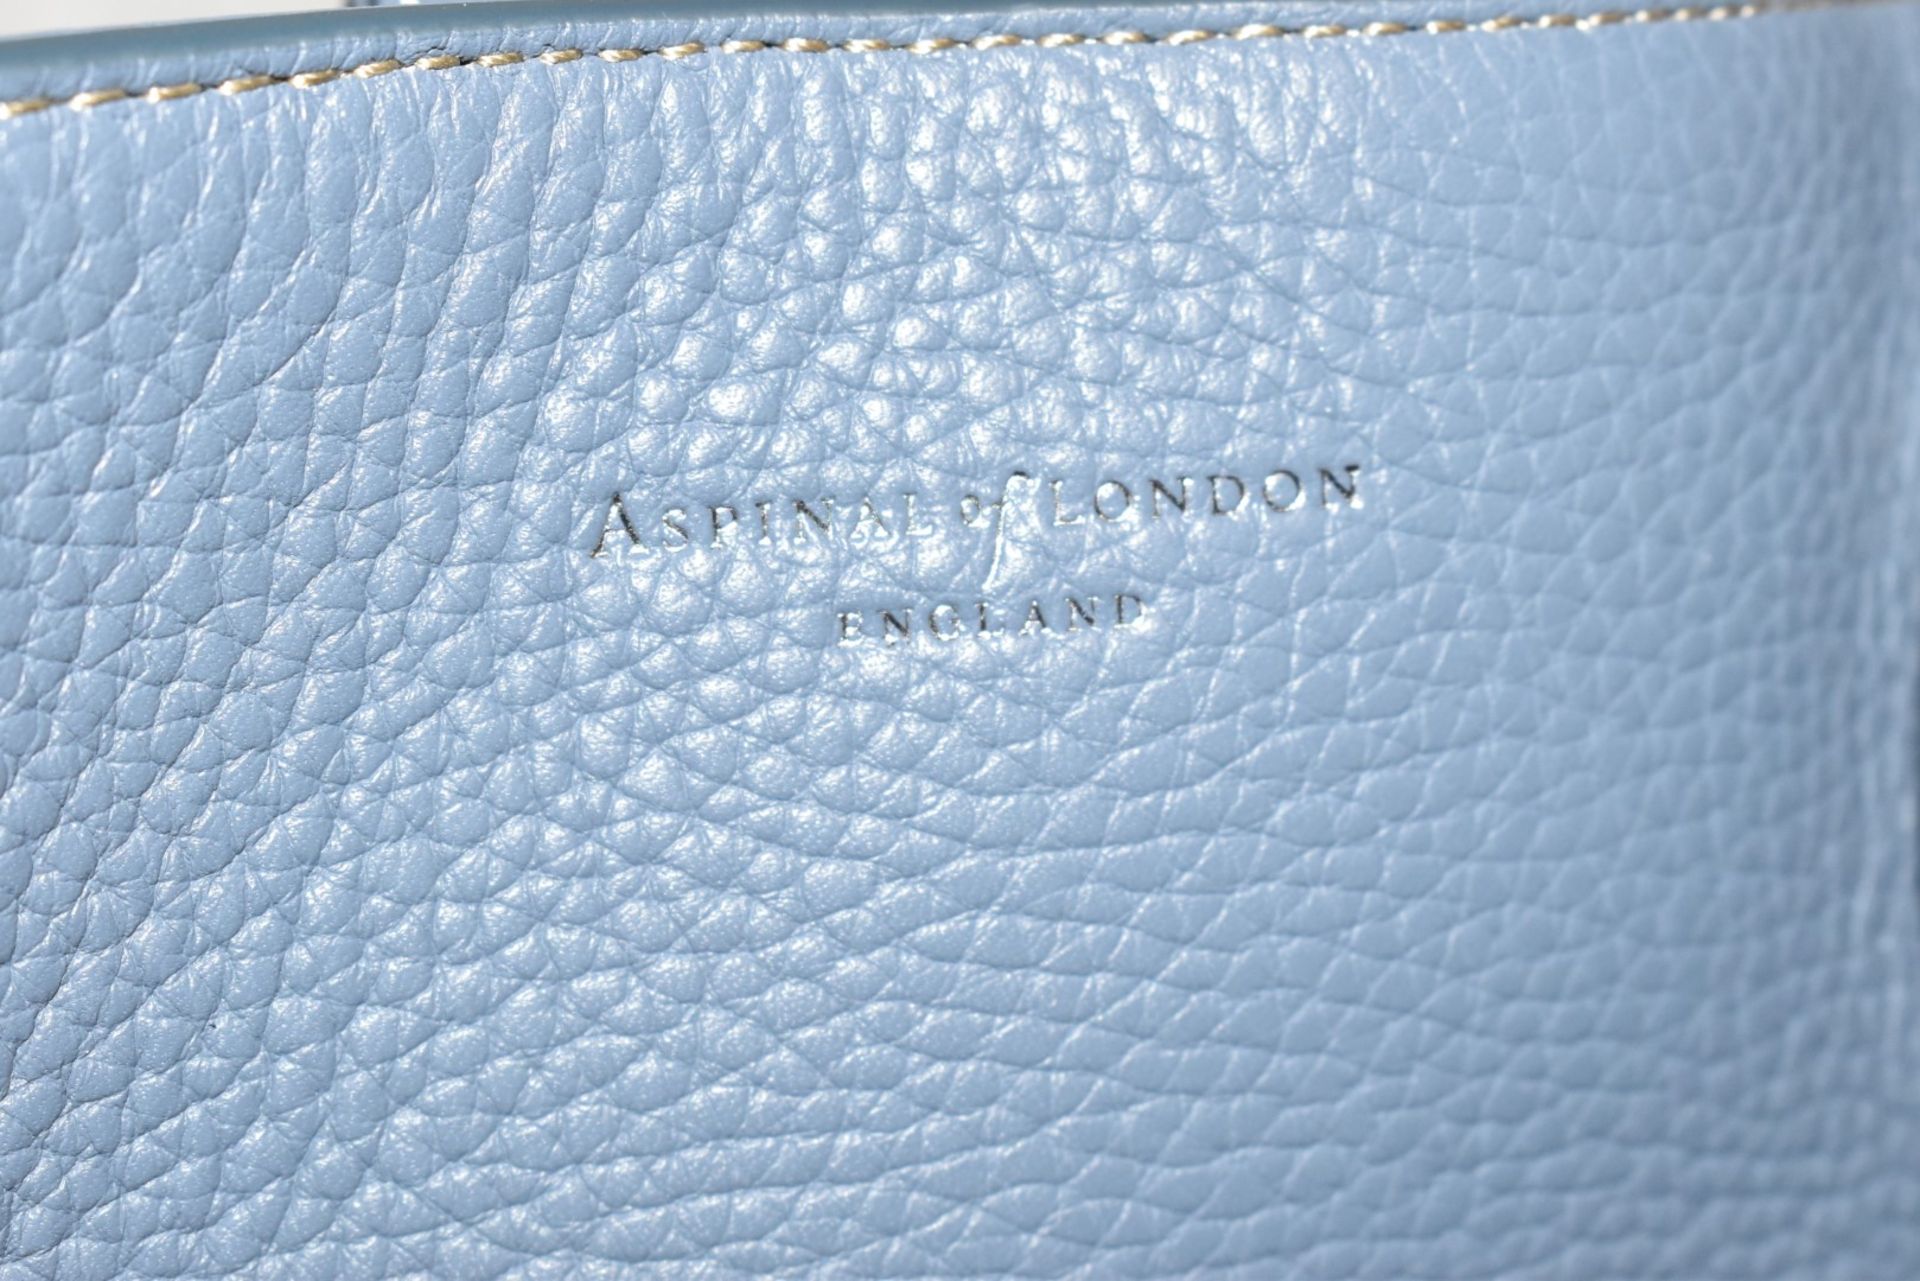 1 x ASPINAL OF LONDON Luxury Leather Tote Bag In Pale Blue - Original Price £675.00 - Image 3 of 6